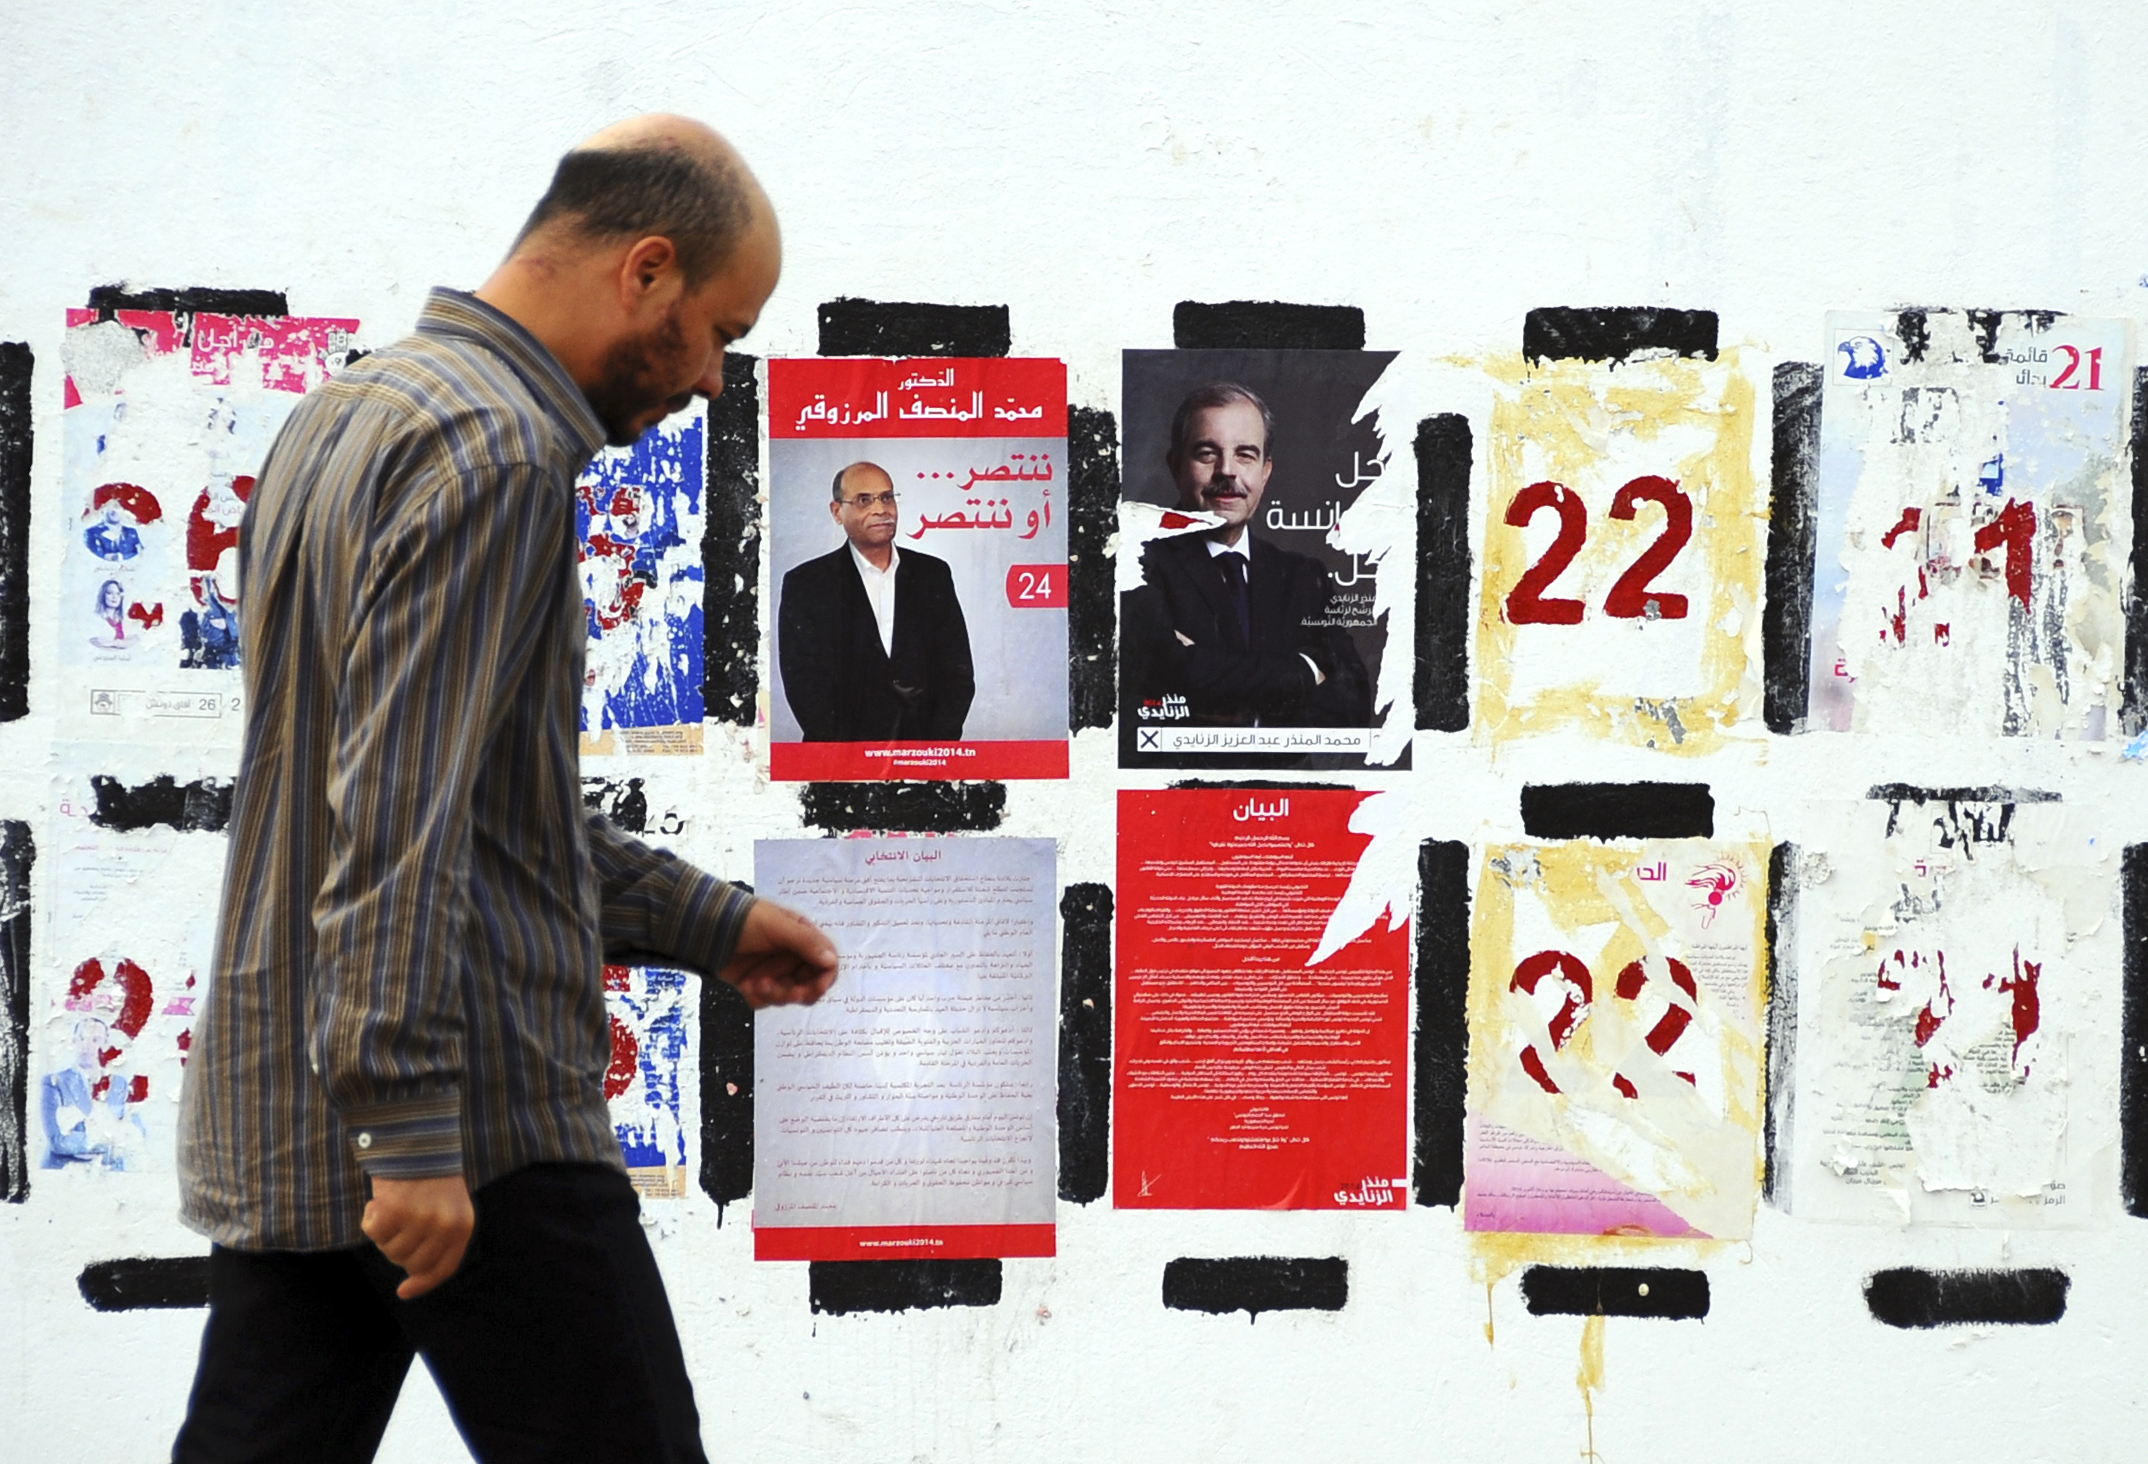 PHOTO: In this photo taken Nov. 5, 2014, a man walks past electoral posters for the upcoming presidential elections in Tunisia.